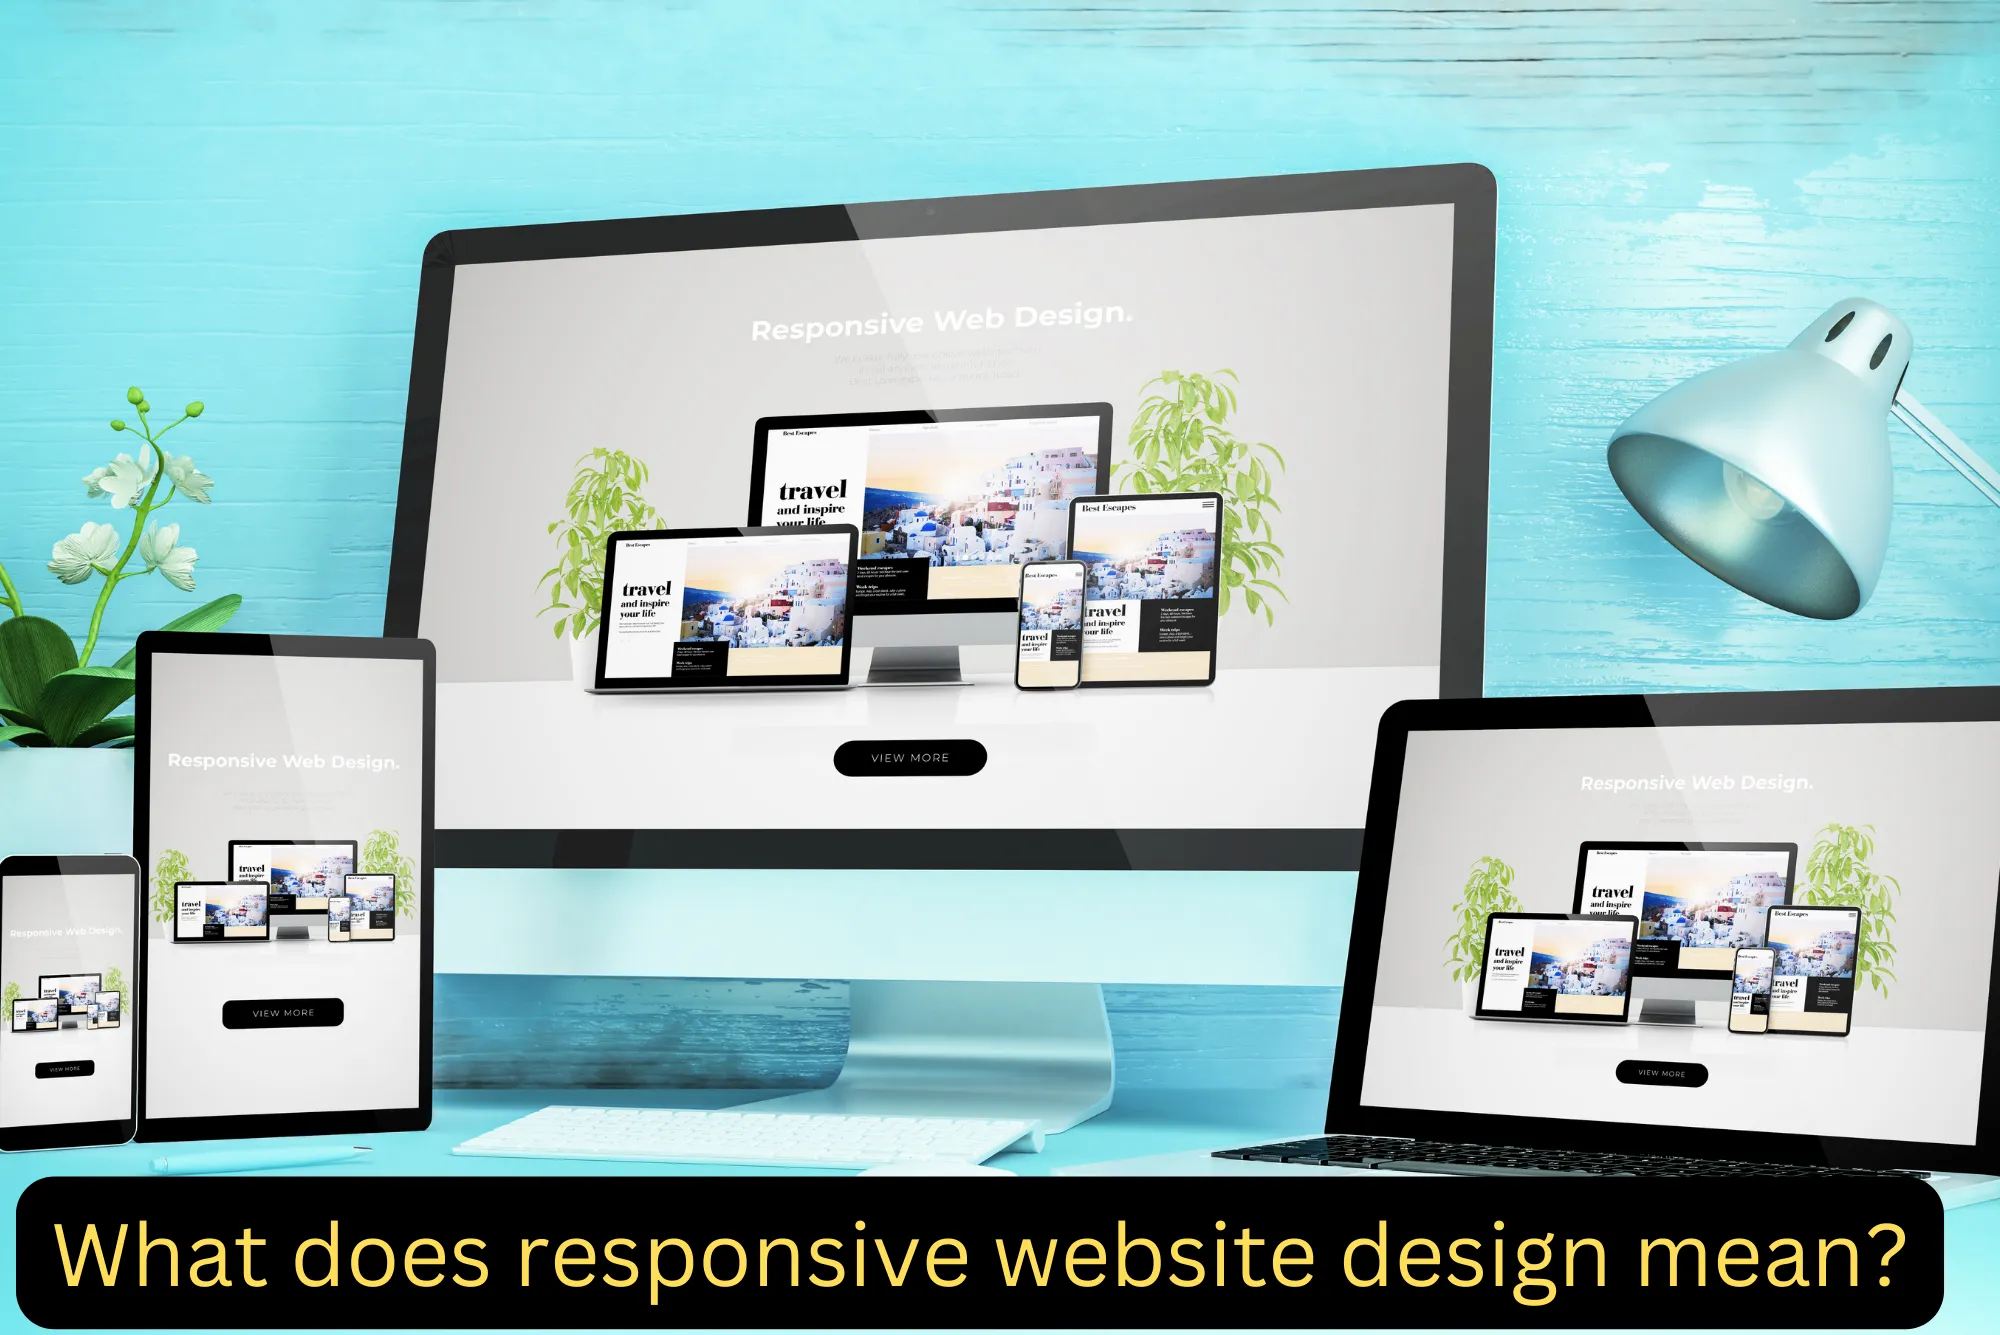 What does responsive website design mean